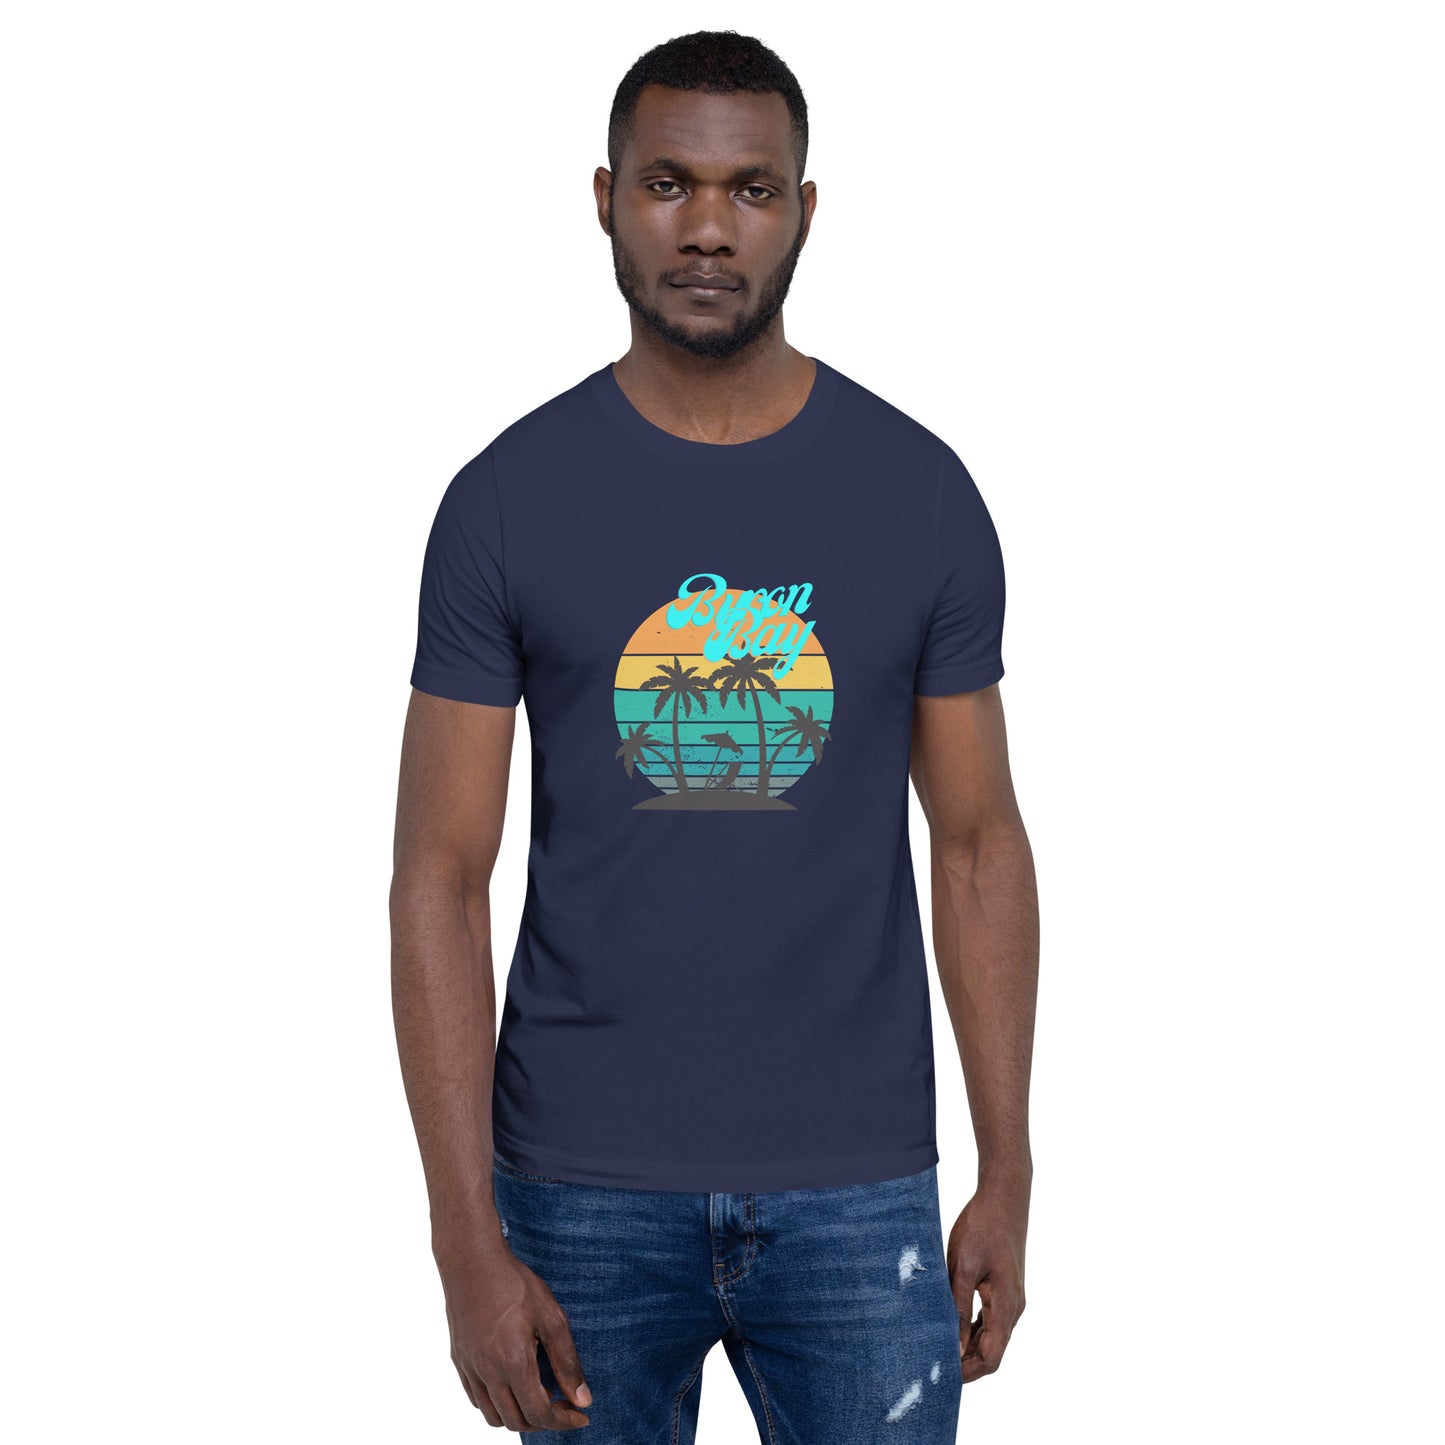  Unisex T-Shirt - Navy - Front view, on man standing with arms by side - Byron Bay design on front - Genuine Byron Bay Merchandise | Produced by Go Sea Kayak Byron Bay 